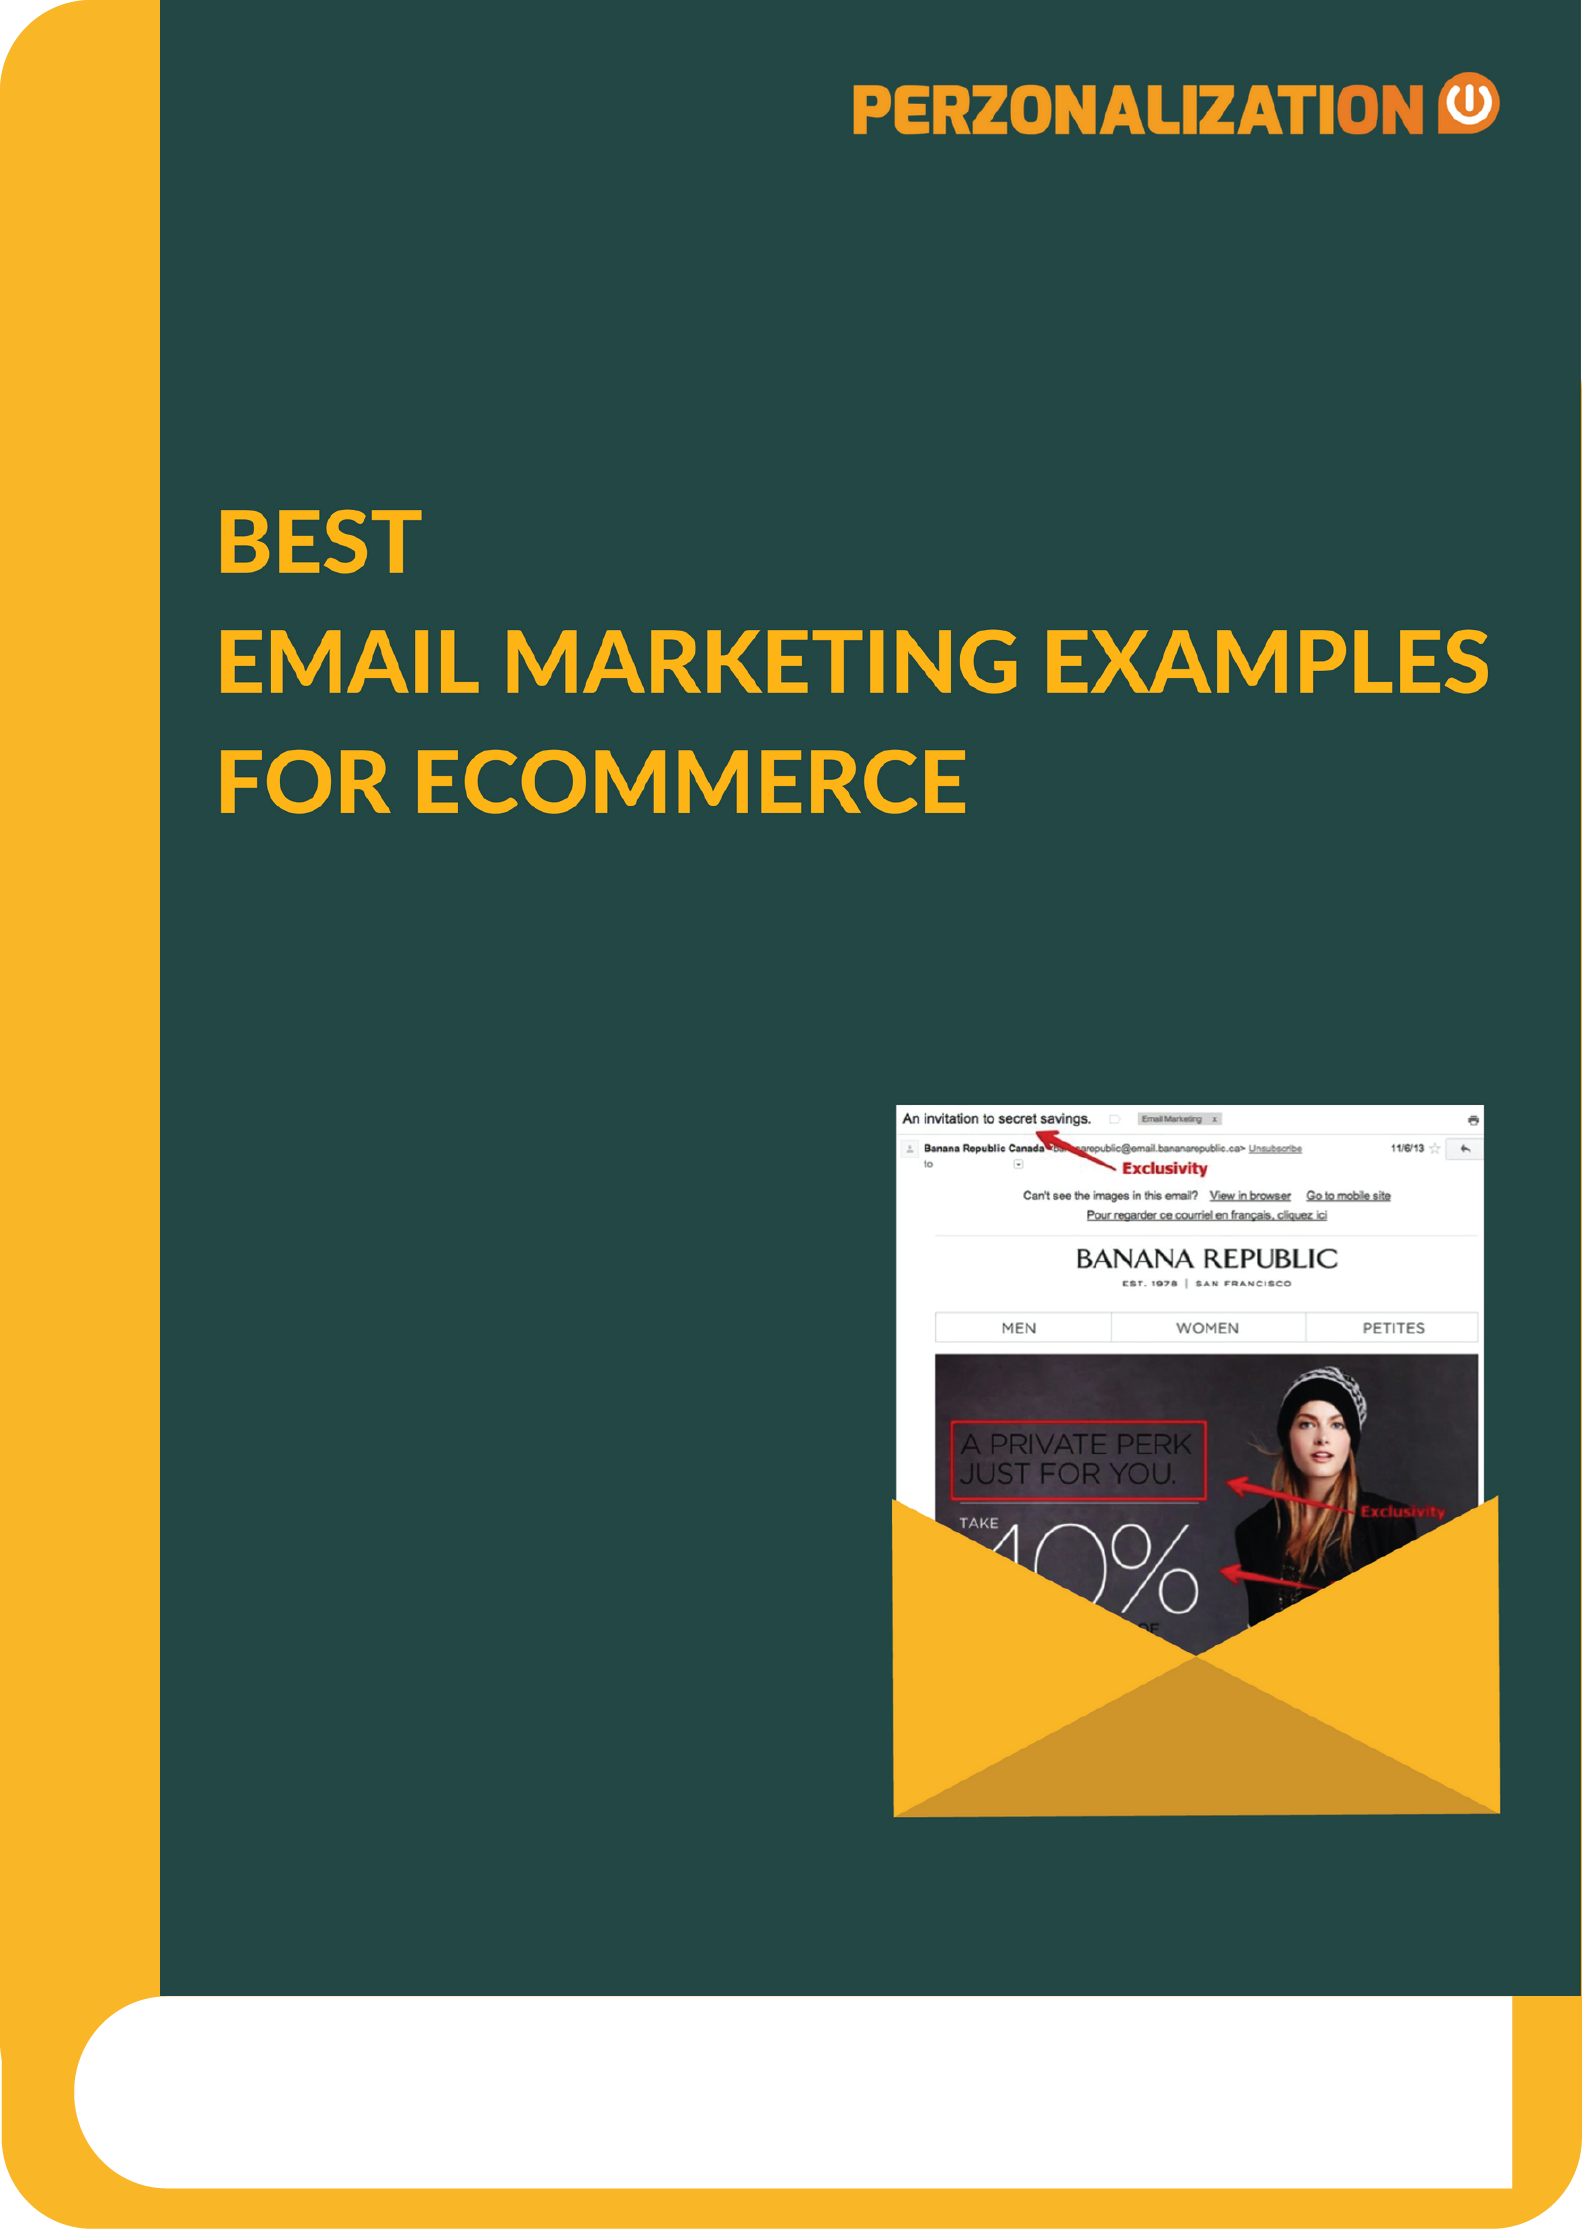 It's not a surprise that best email marketing examples usually come from the eCommerce websites as email is a great retention tool for online retailers.